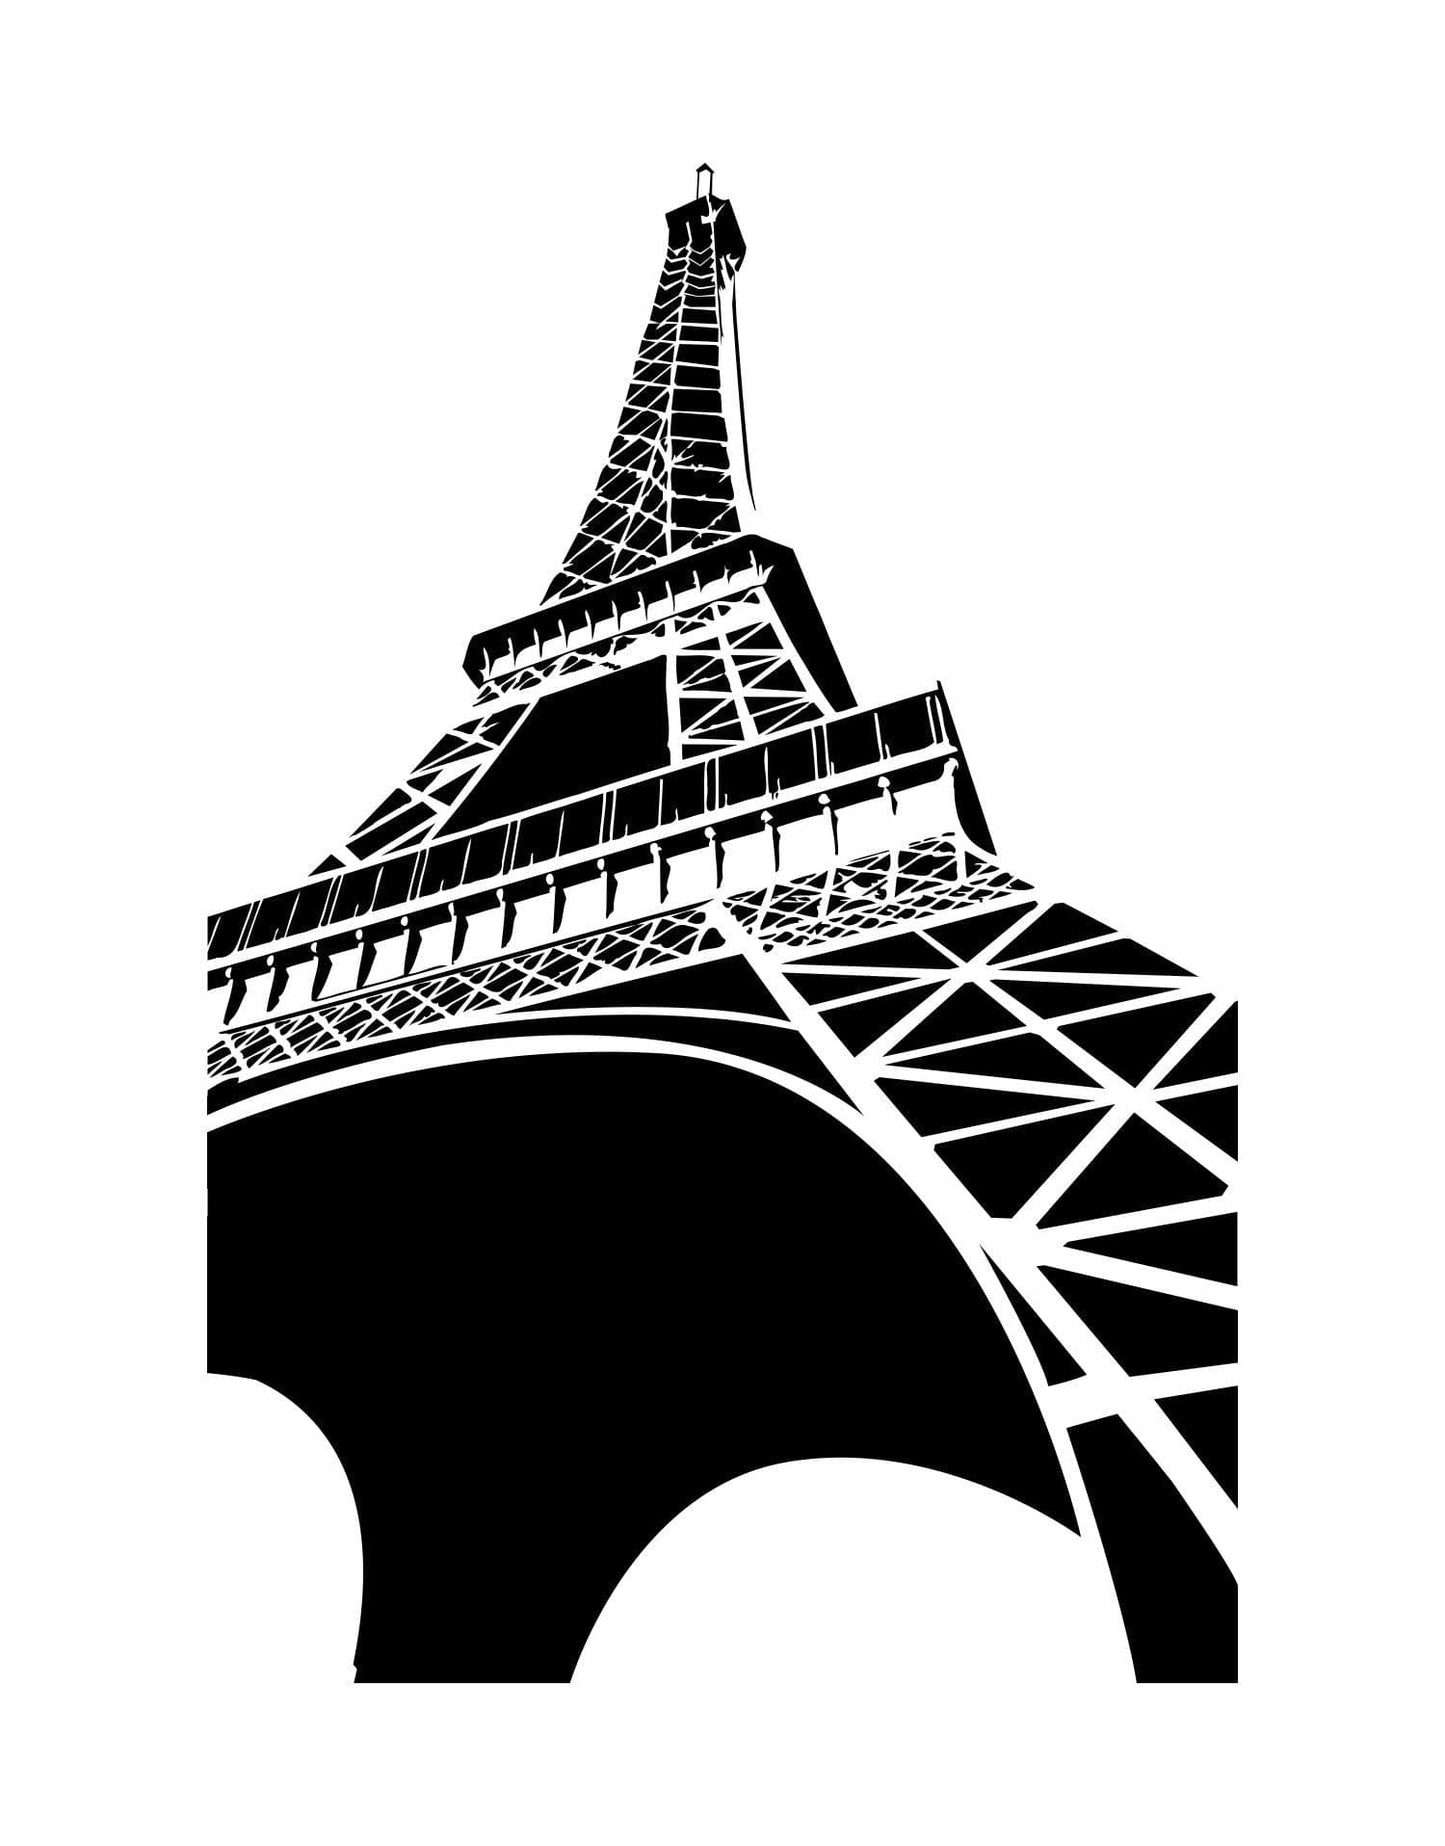 Large Eiffel Tower Wall Decal. Paris France Home Decor. Edge to Edge. item #OS_MG102